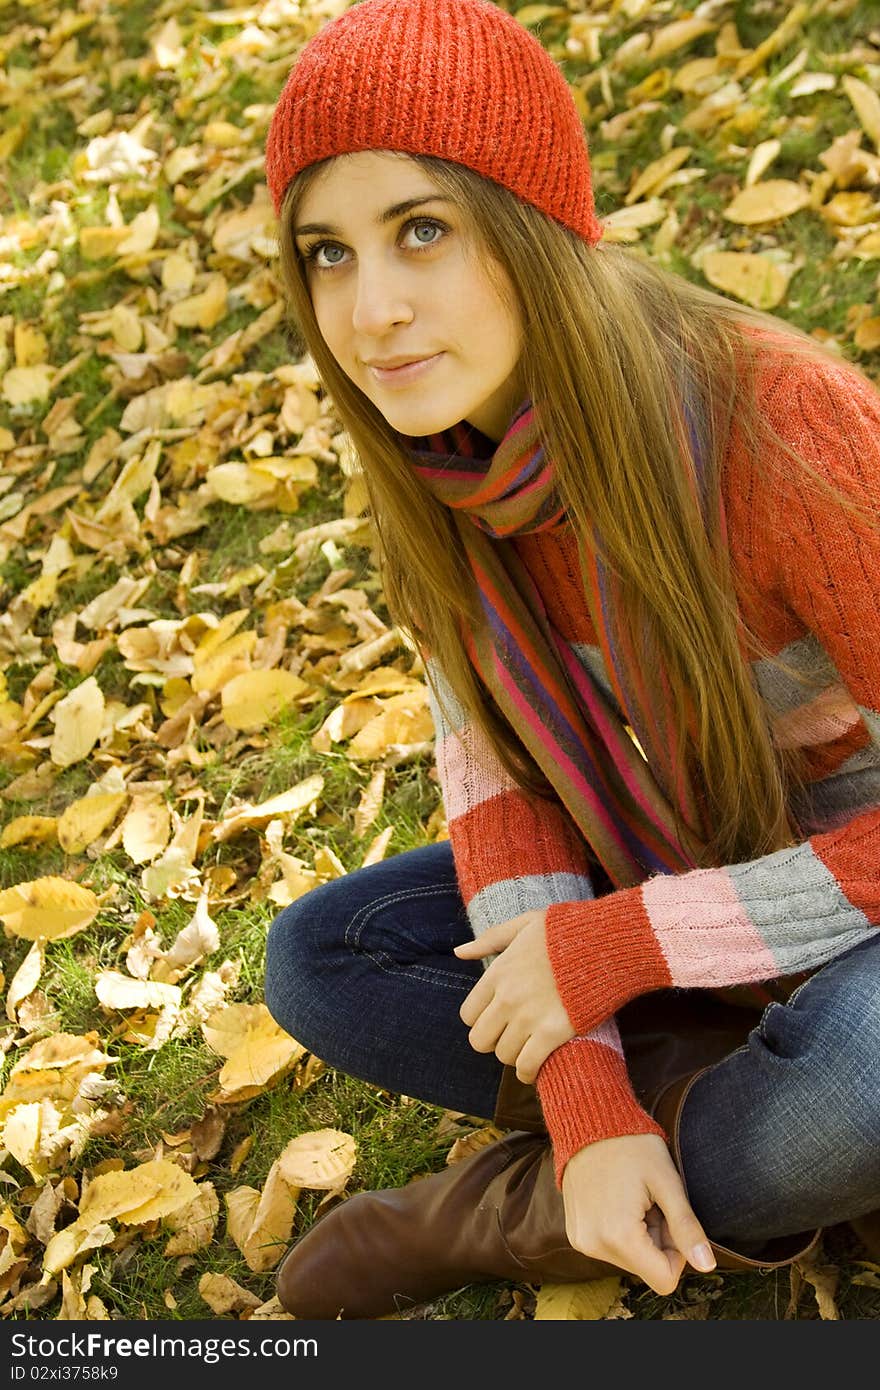 Portrait of a beautiful young woman sitting in a pile of leaves, smiling, looking up. Portrait of a beautiful young woman sitting in a pile of leaves, smiling, looking up